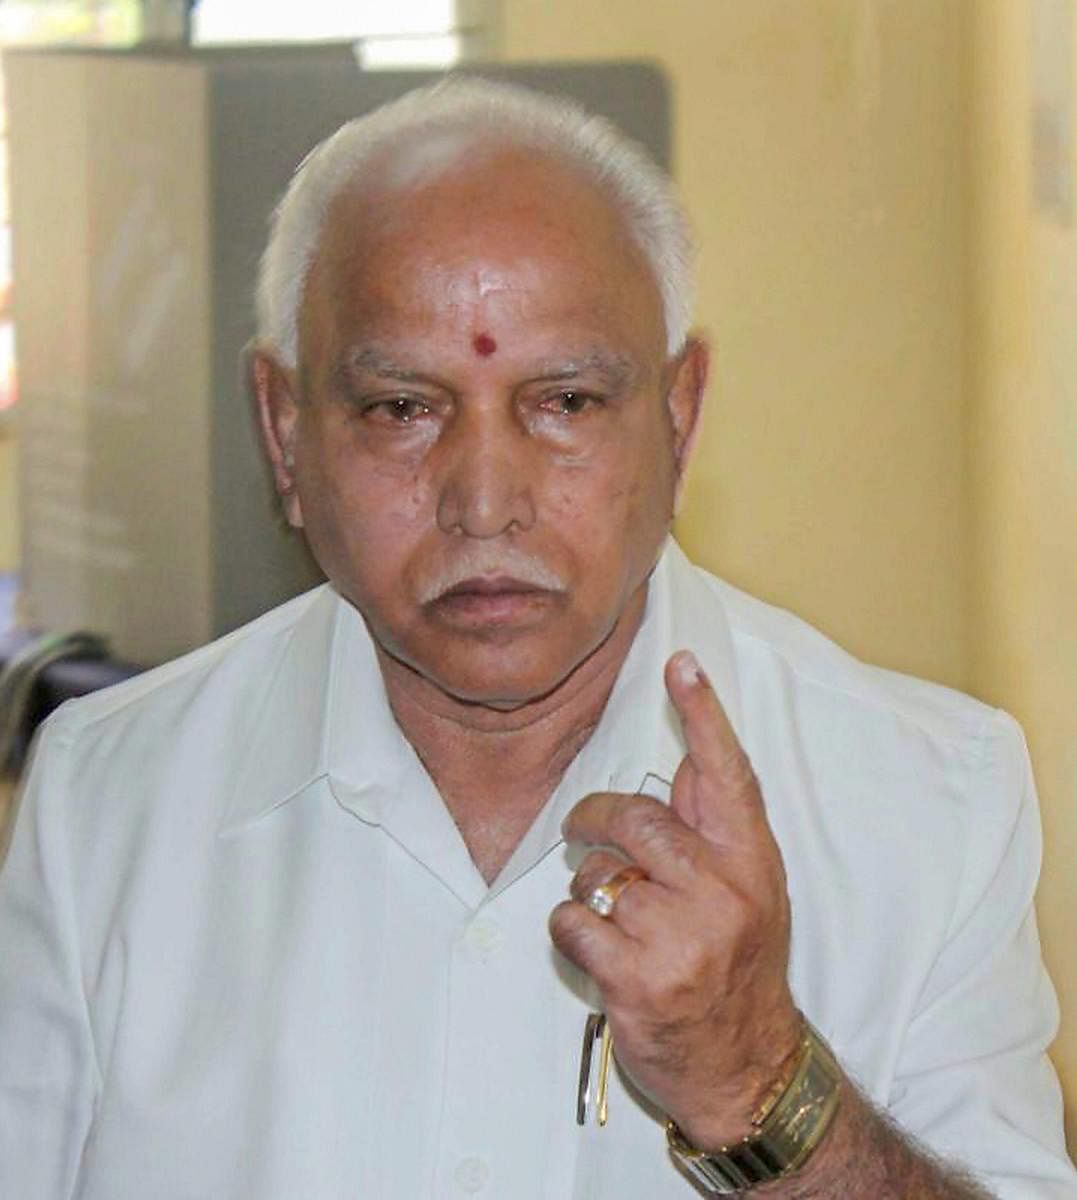 BJP's chief ministerial candidate B S Yeddyurappa shows his inked finger after casting for Assembly elections at Shikaripur in Shivamoga district on Saturday. PTI Photo